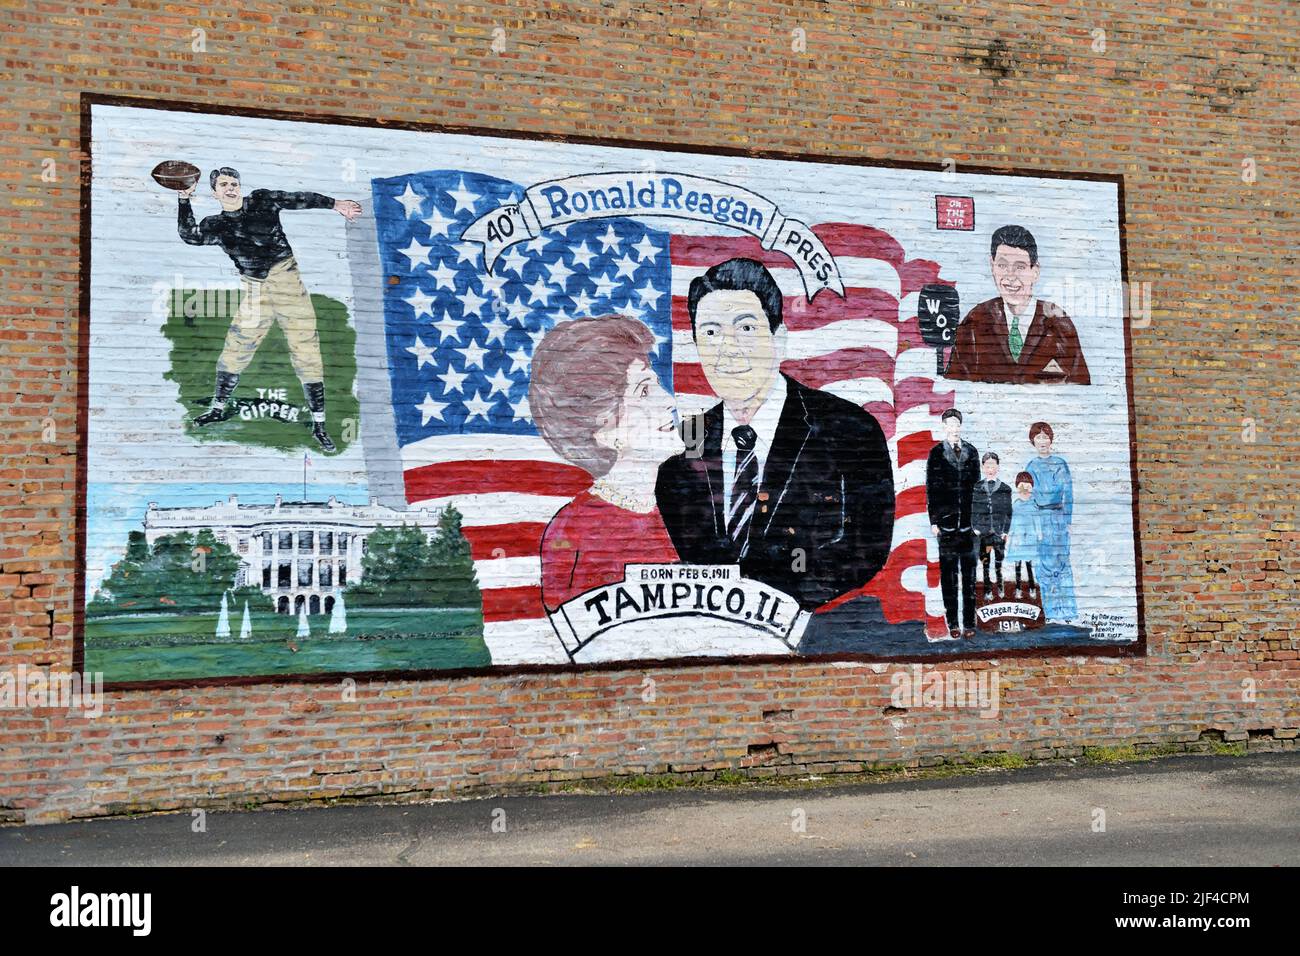 Tampico, Illinois, USA. Mural commemorating the birthplace of Ronald Reagan, the 40th President of the United States. Stock Photo